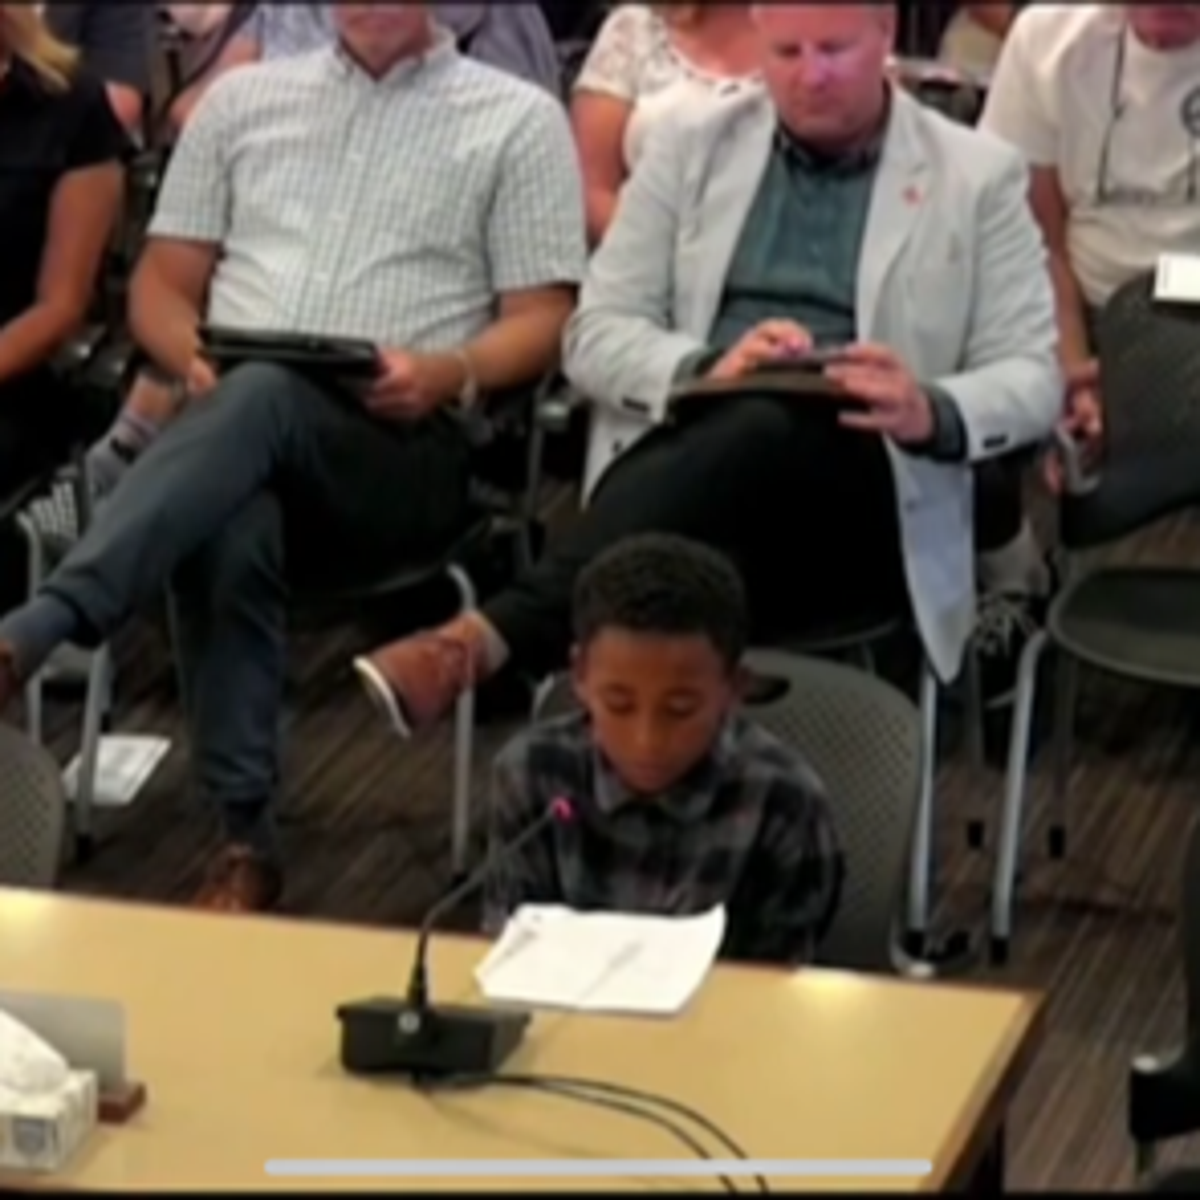 Schoolboy, 10, stuns council meeting with stirring speech on racism he has suffered (news.yahoo.com)